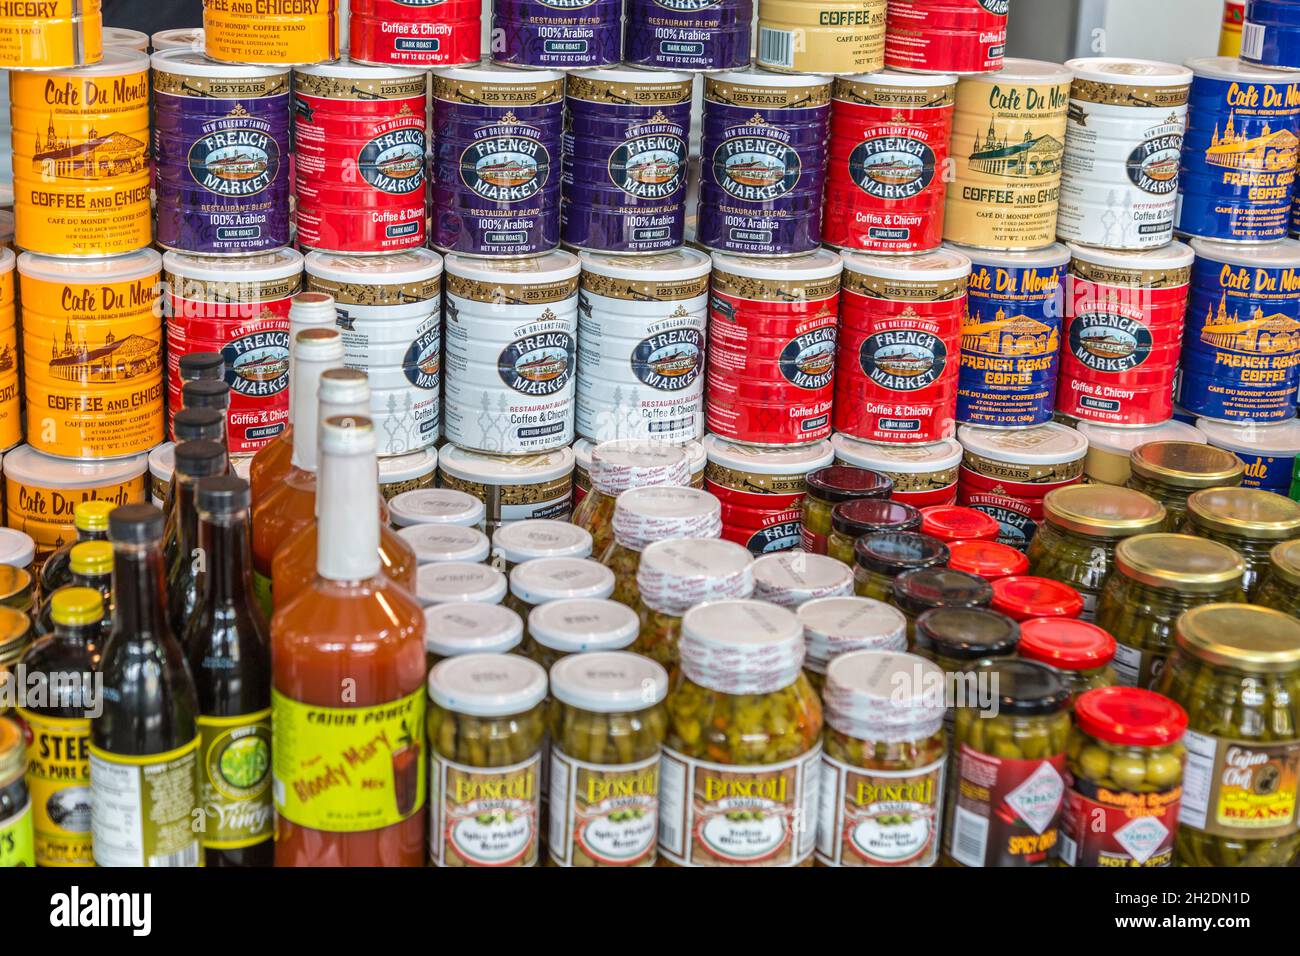 Coffee and other food products for sale at the French Market in the French Quarter of New Orleans, Louisiana Stock Photo